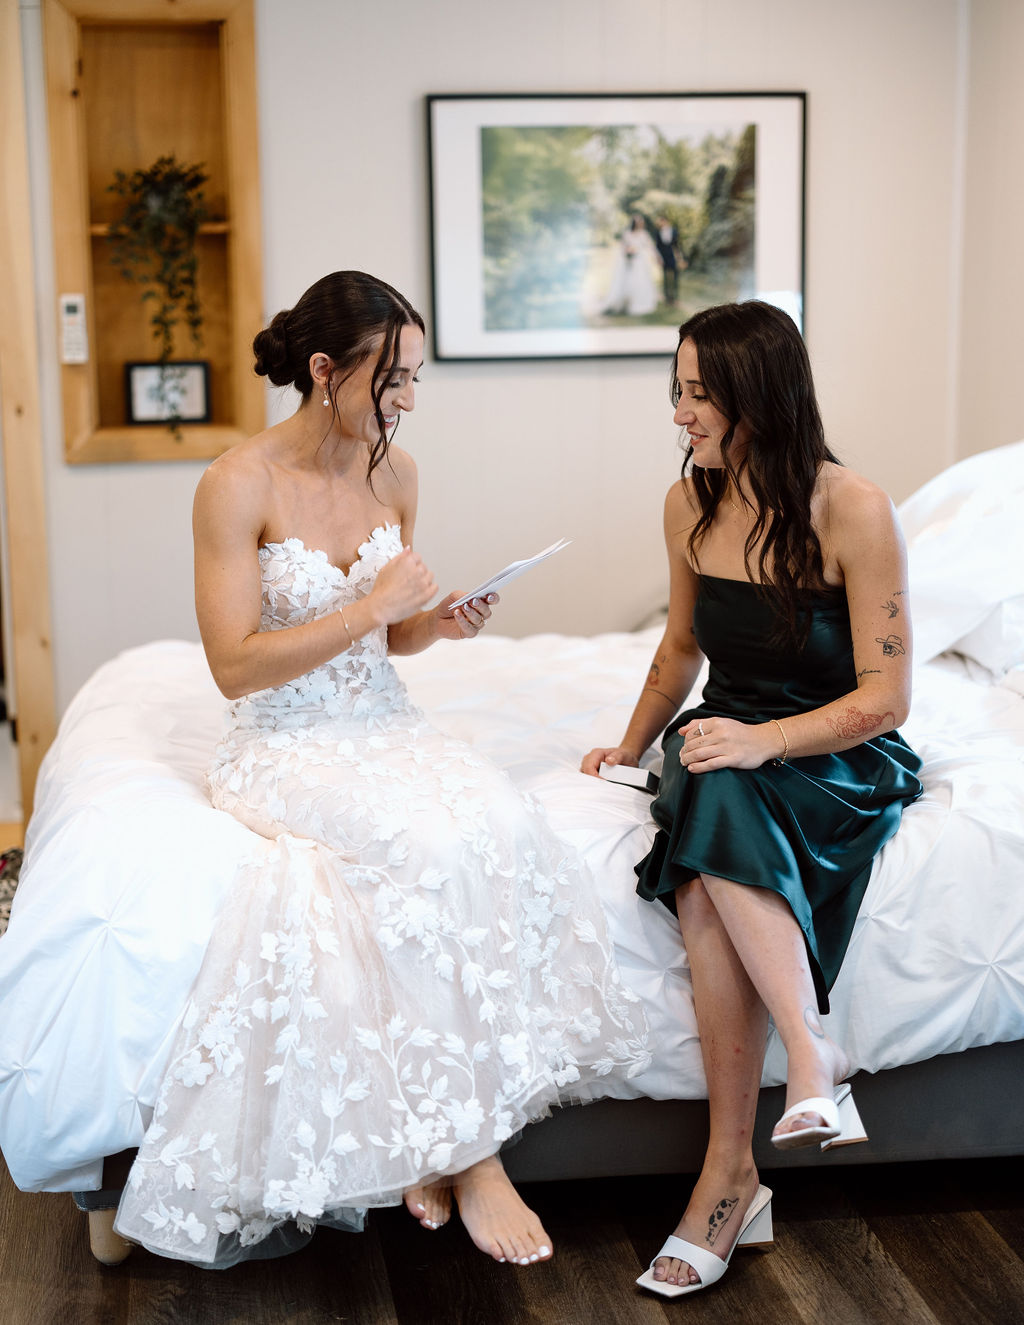 Getting ready in the bridal suite